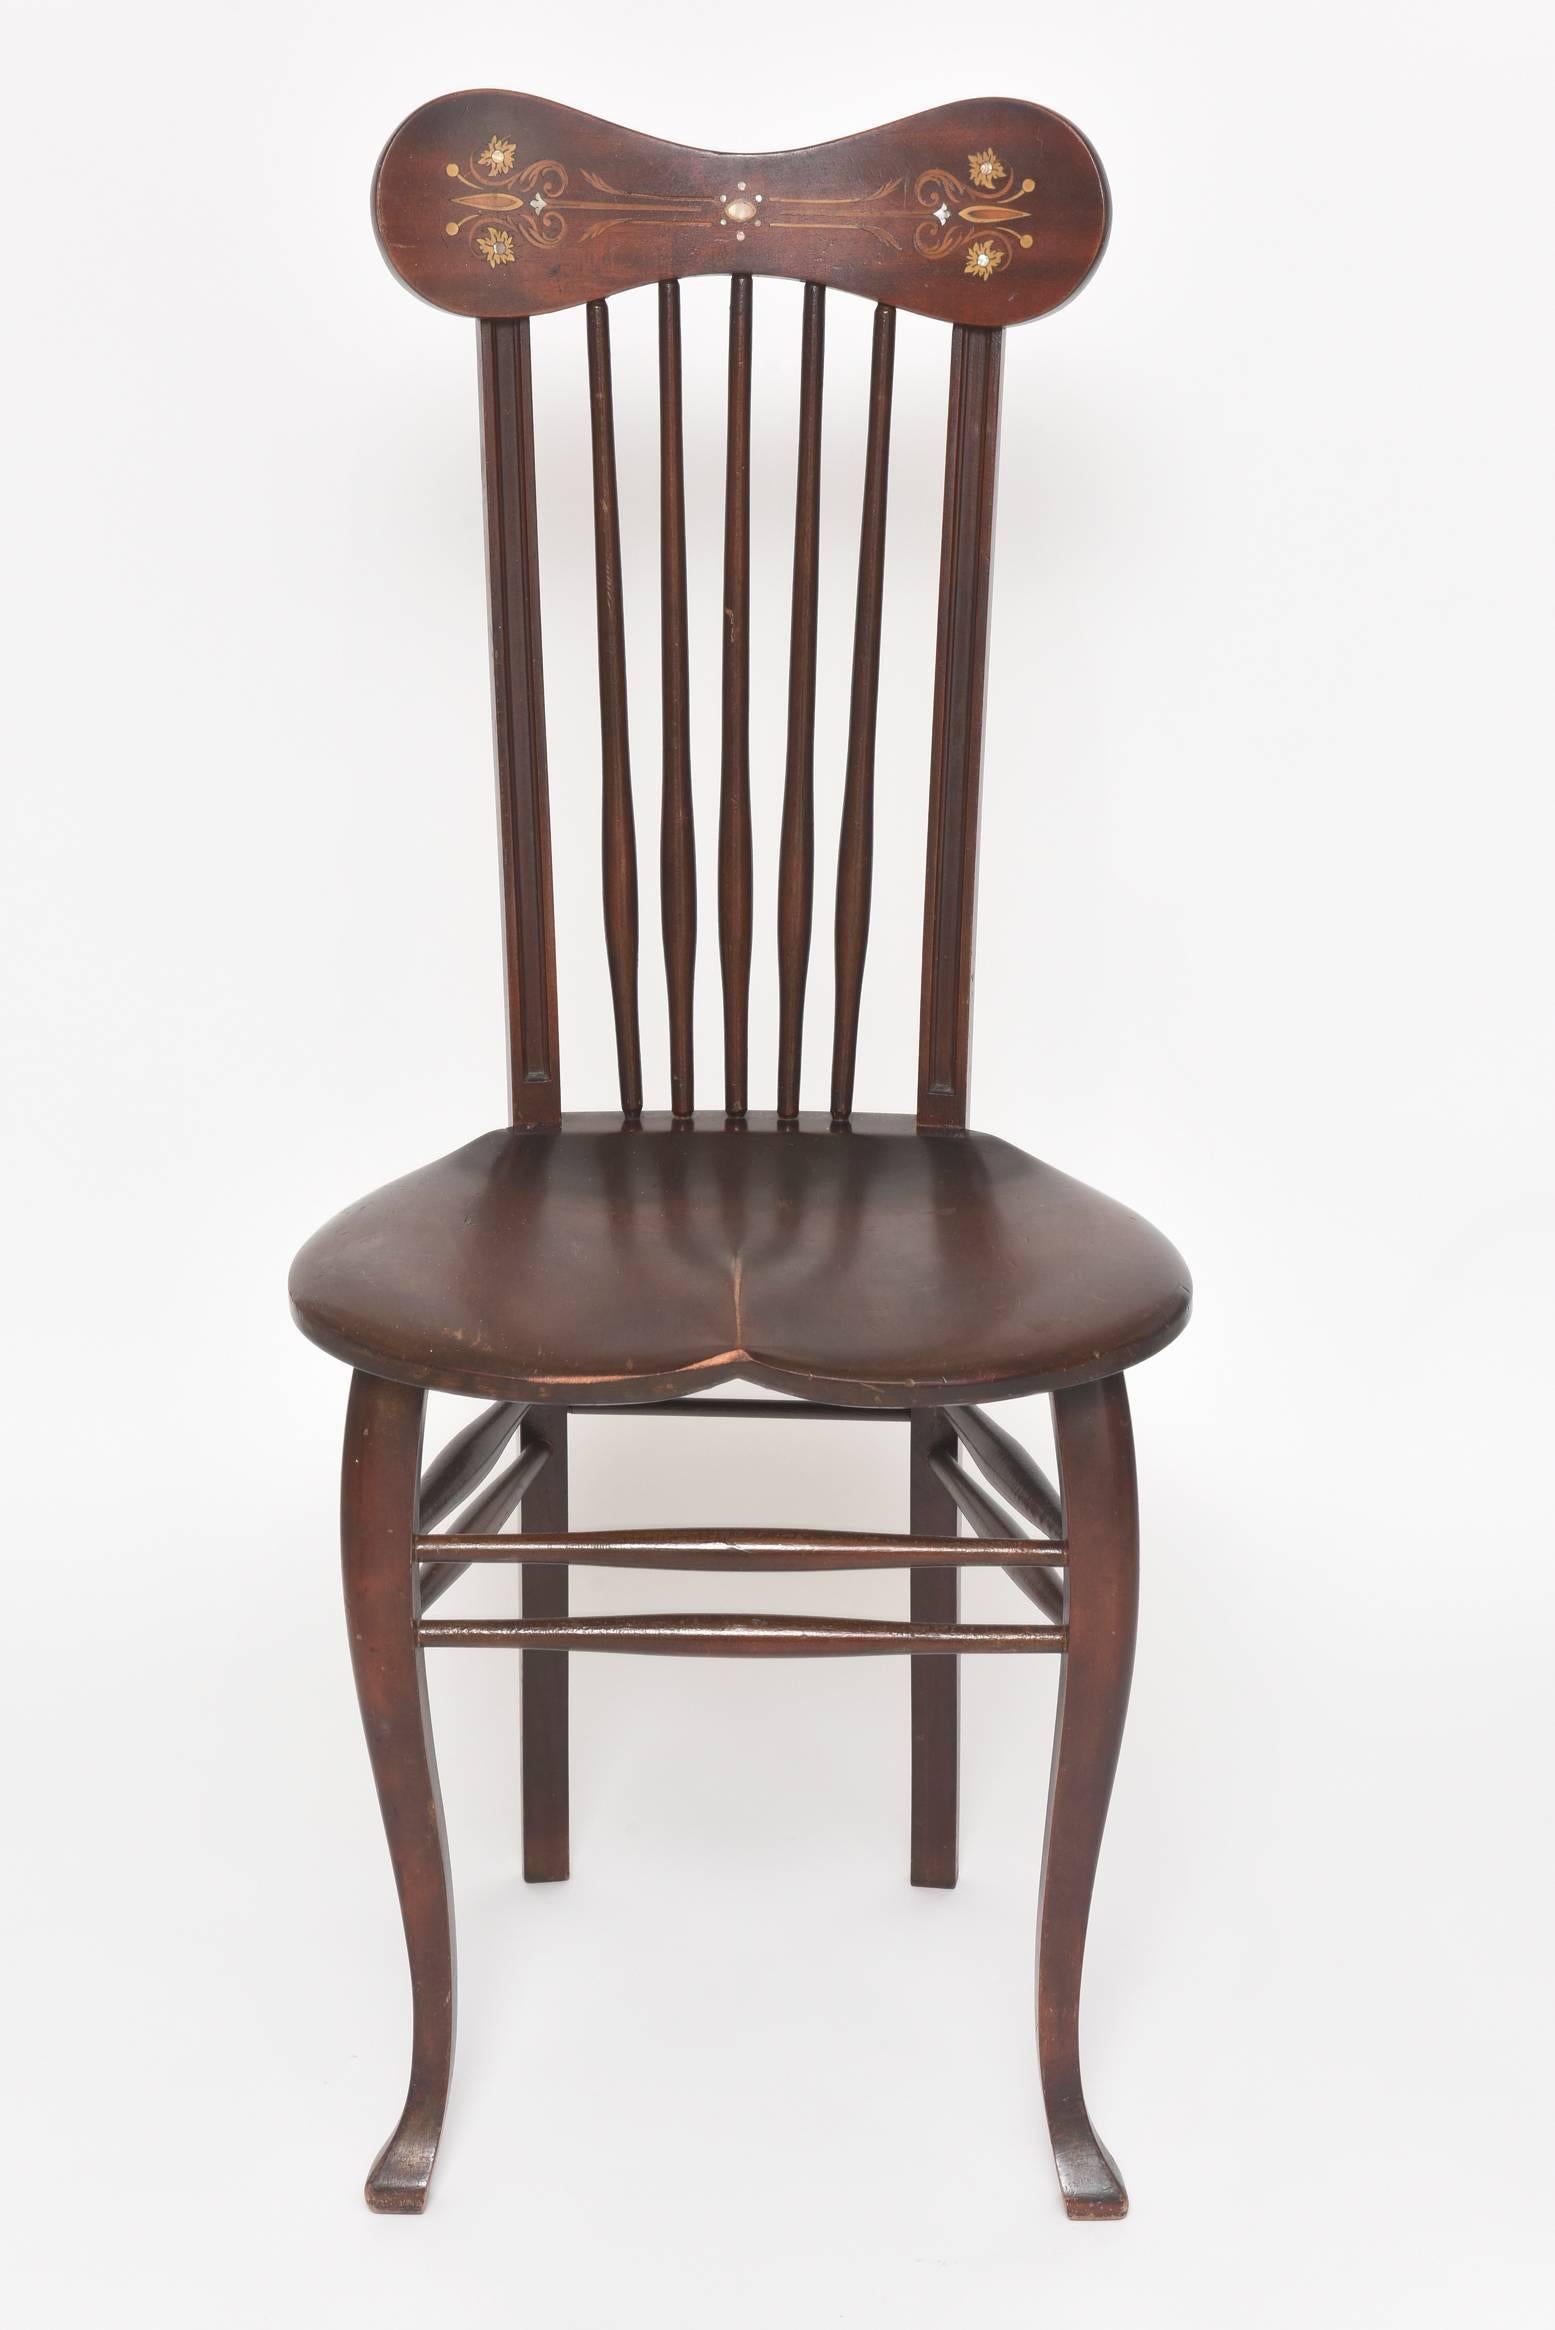 19th century Windsor chair featuring a mother-of-pearl and marquetry design on the top comb section which is connected to a spindle back that attaches to a saddle slab seat with curved front legs that have padded feet.